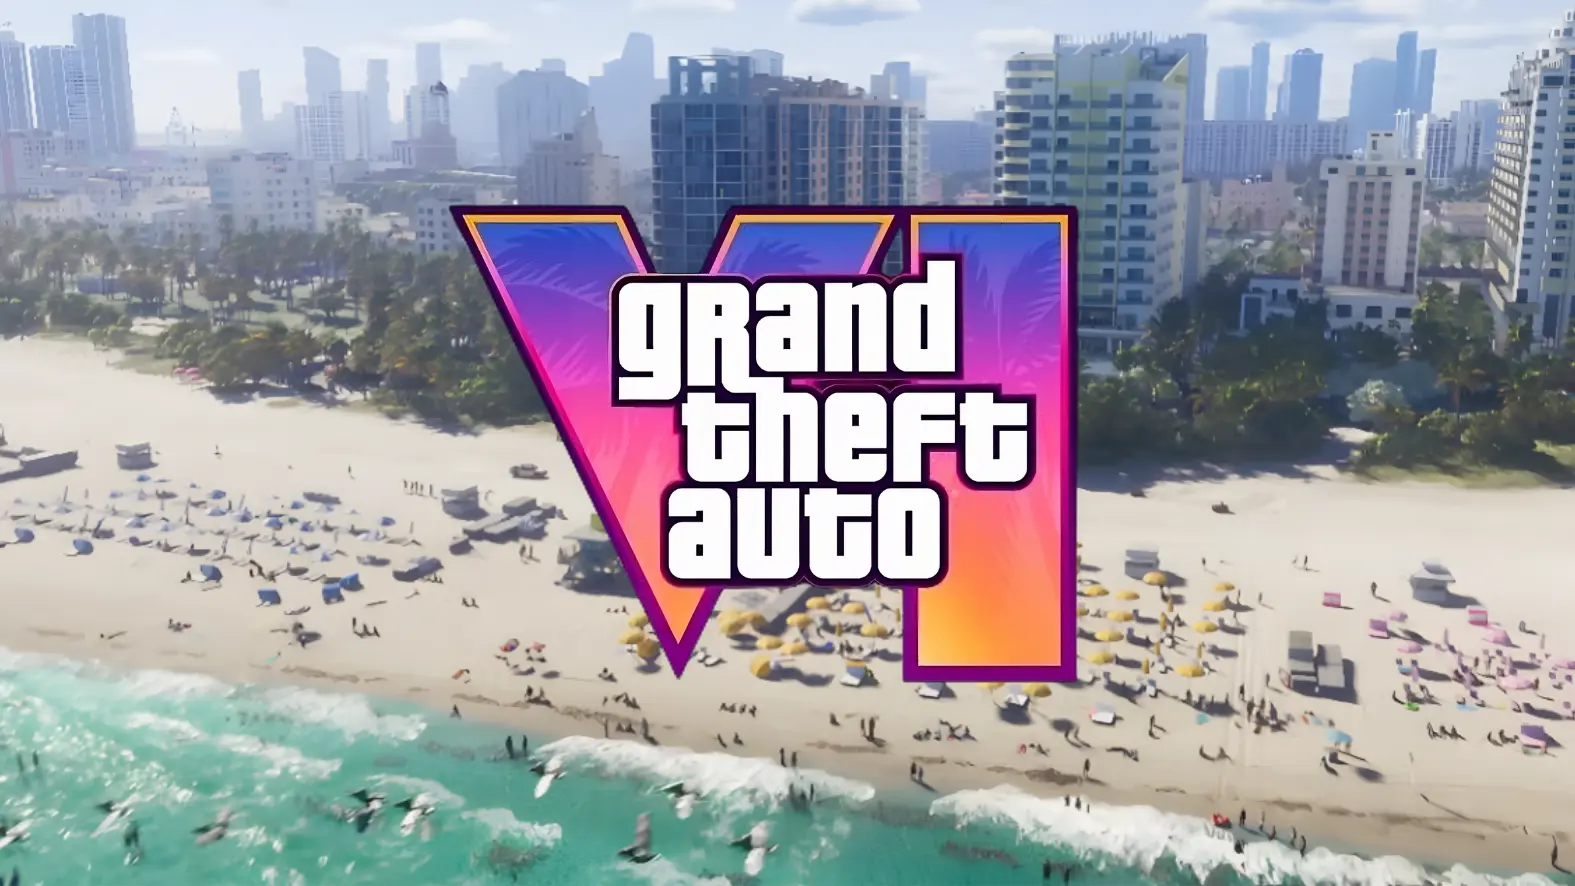 grand theft auto 6: Grand Theft Auto 6: Release Date speculations, game's  enigmatic future, and the crypto connection - The Economic Times